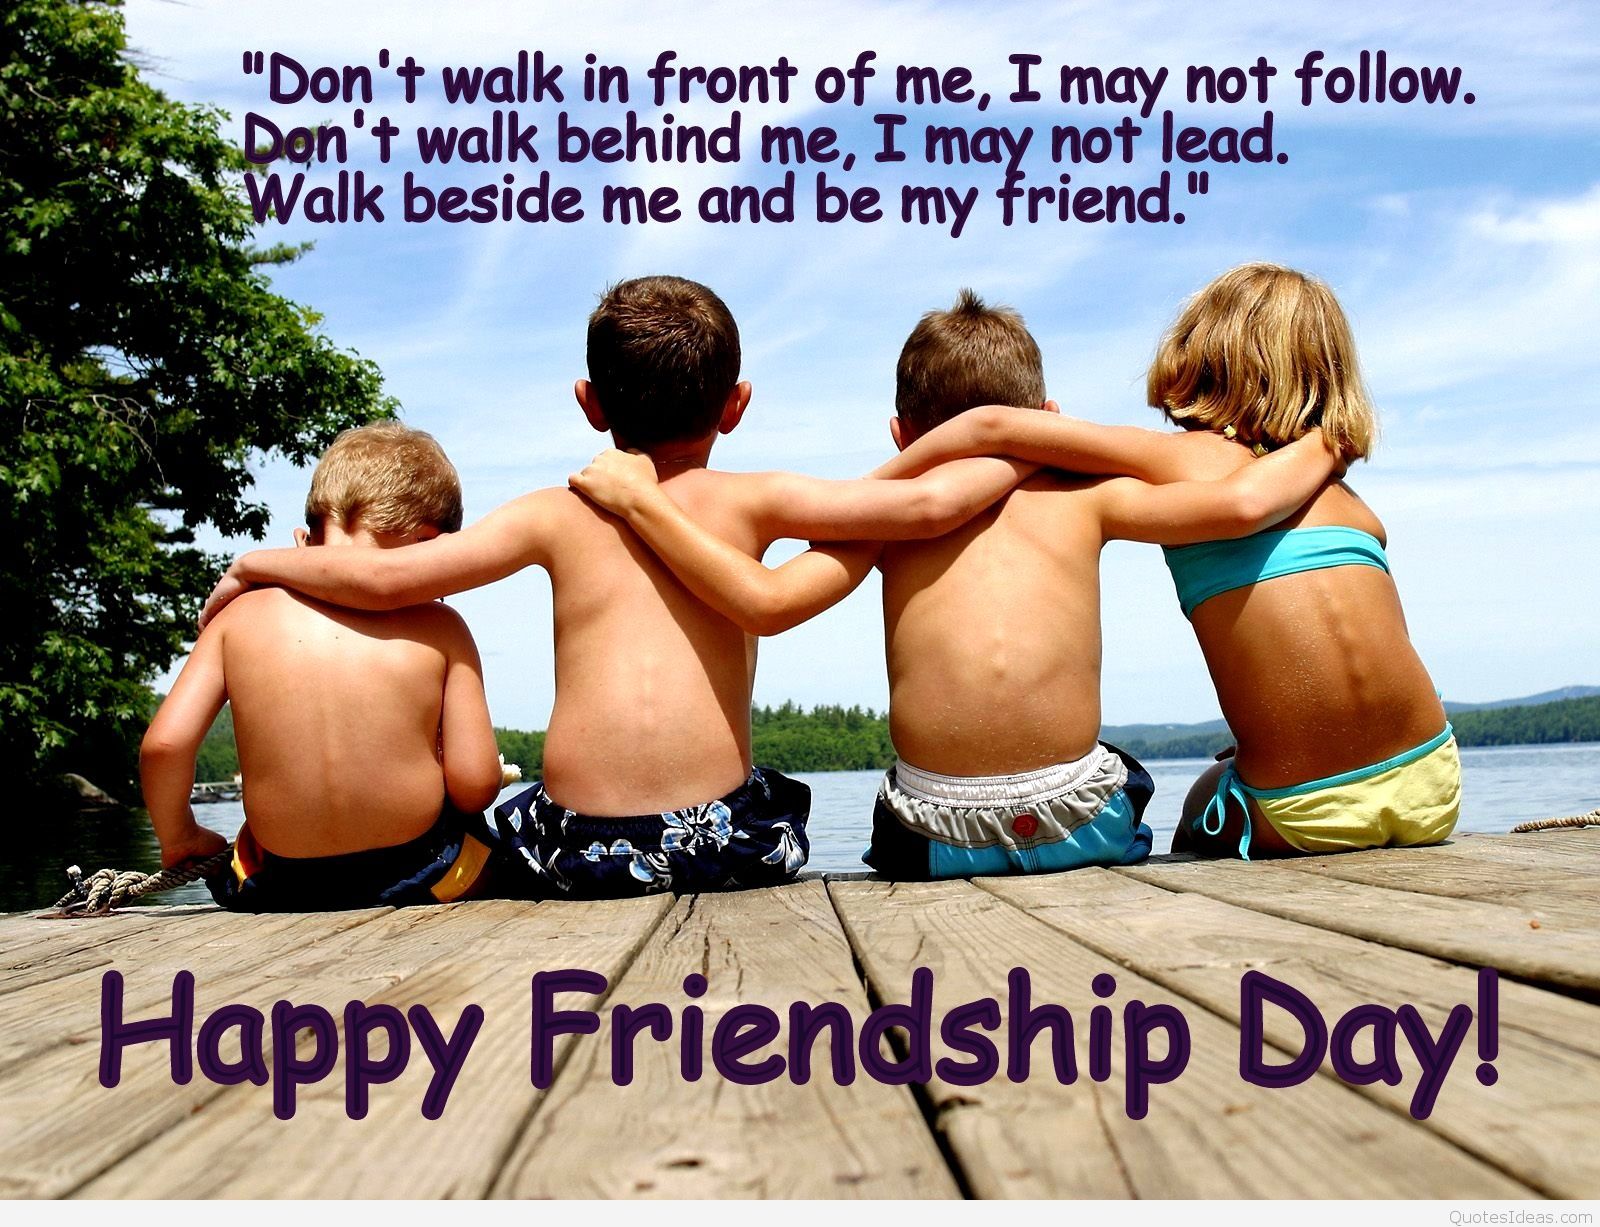 Friendship Day Wallpaper Quotes Friendship Day Funny HD Wallpaper